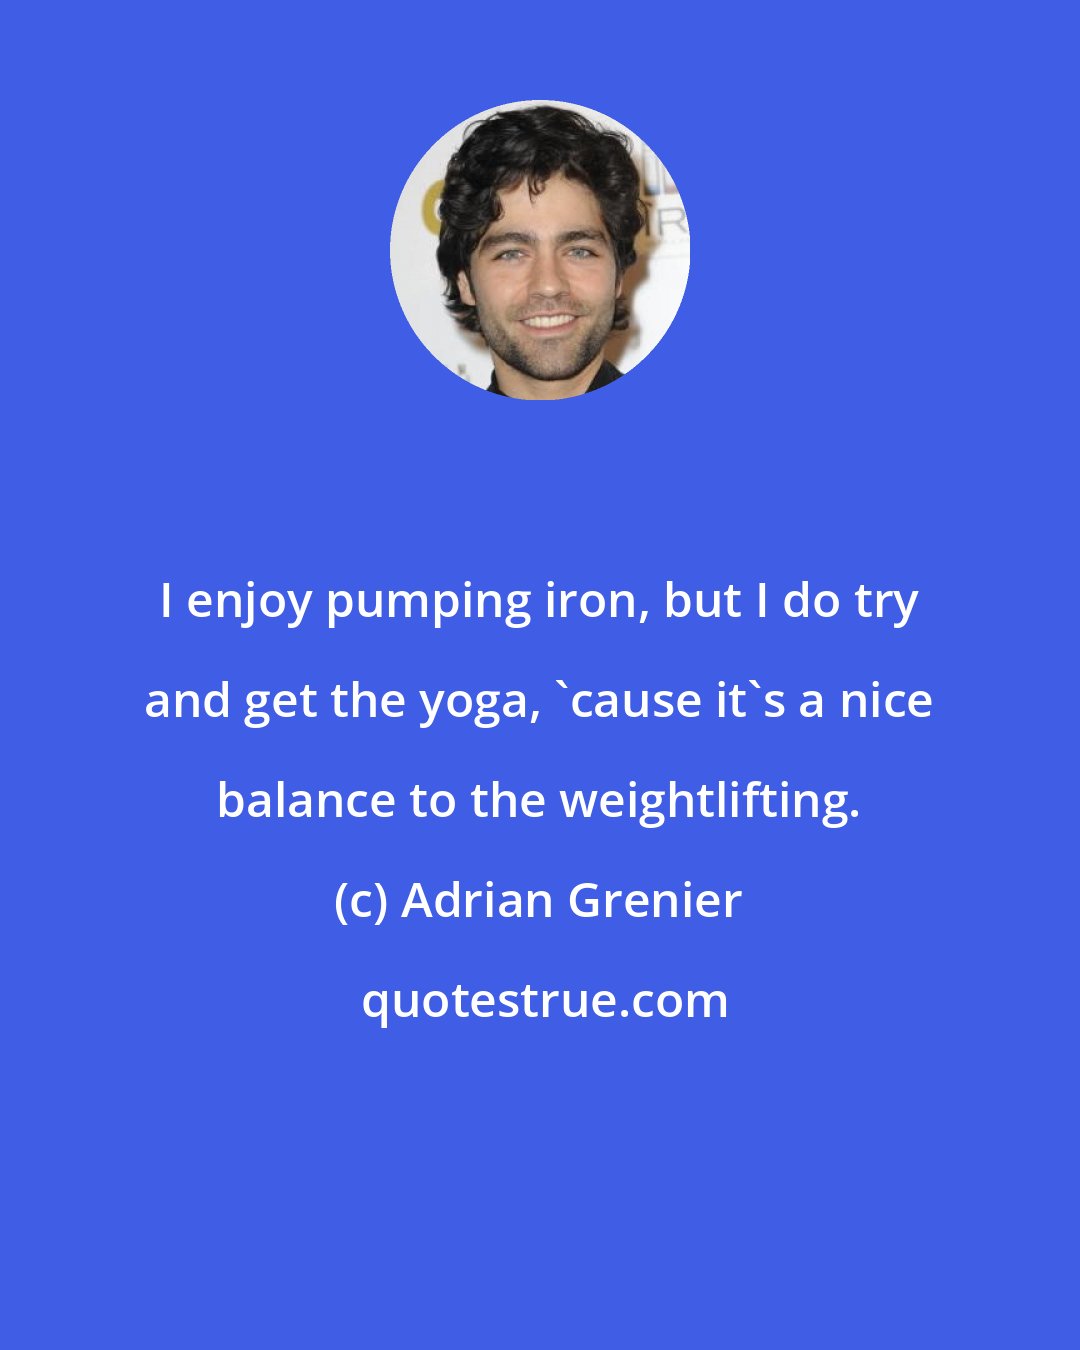 Adrian Grenier: I enjoy pumping iron, but I do try and get the yoga, 'cause it's a nice balance to the weightlifting.